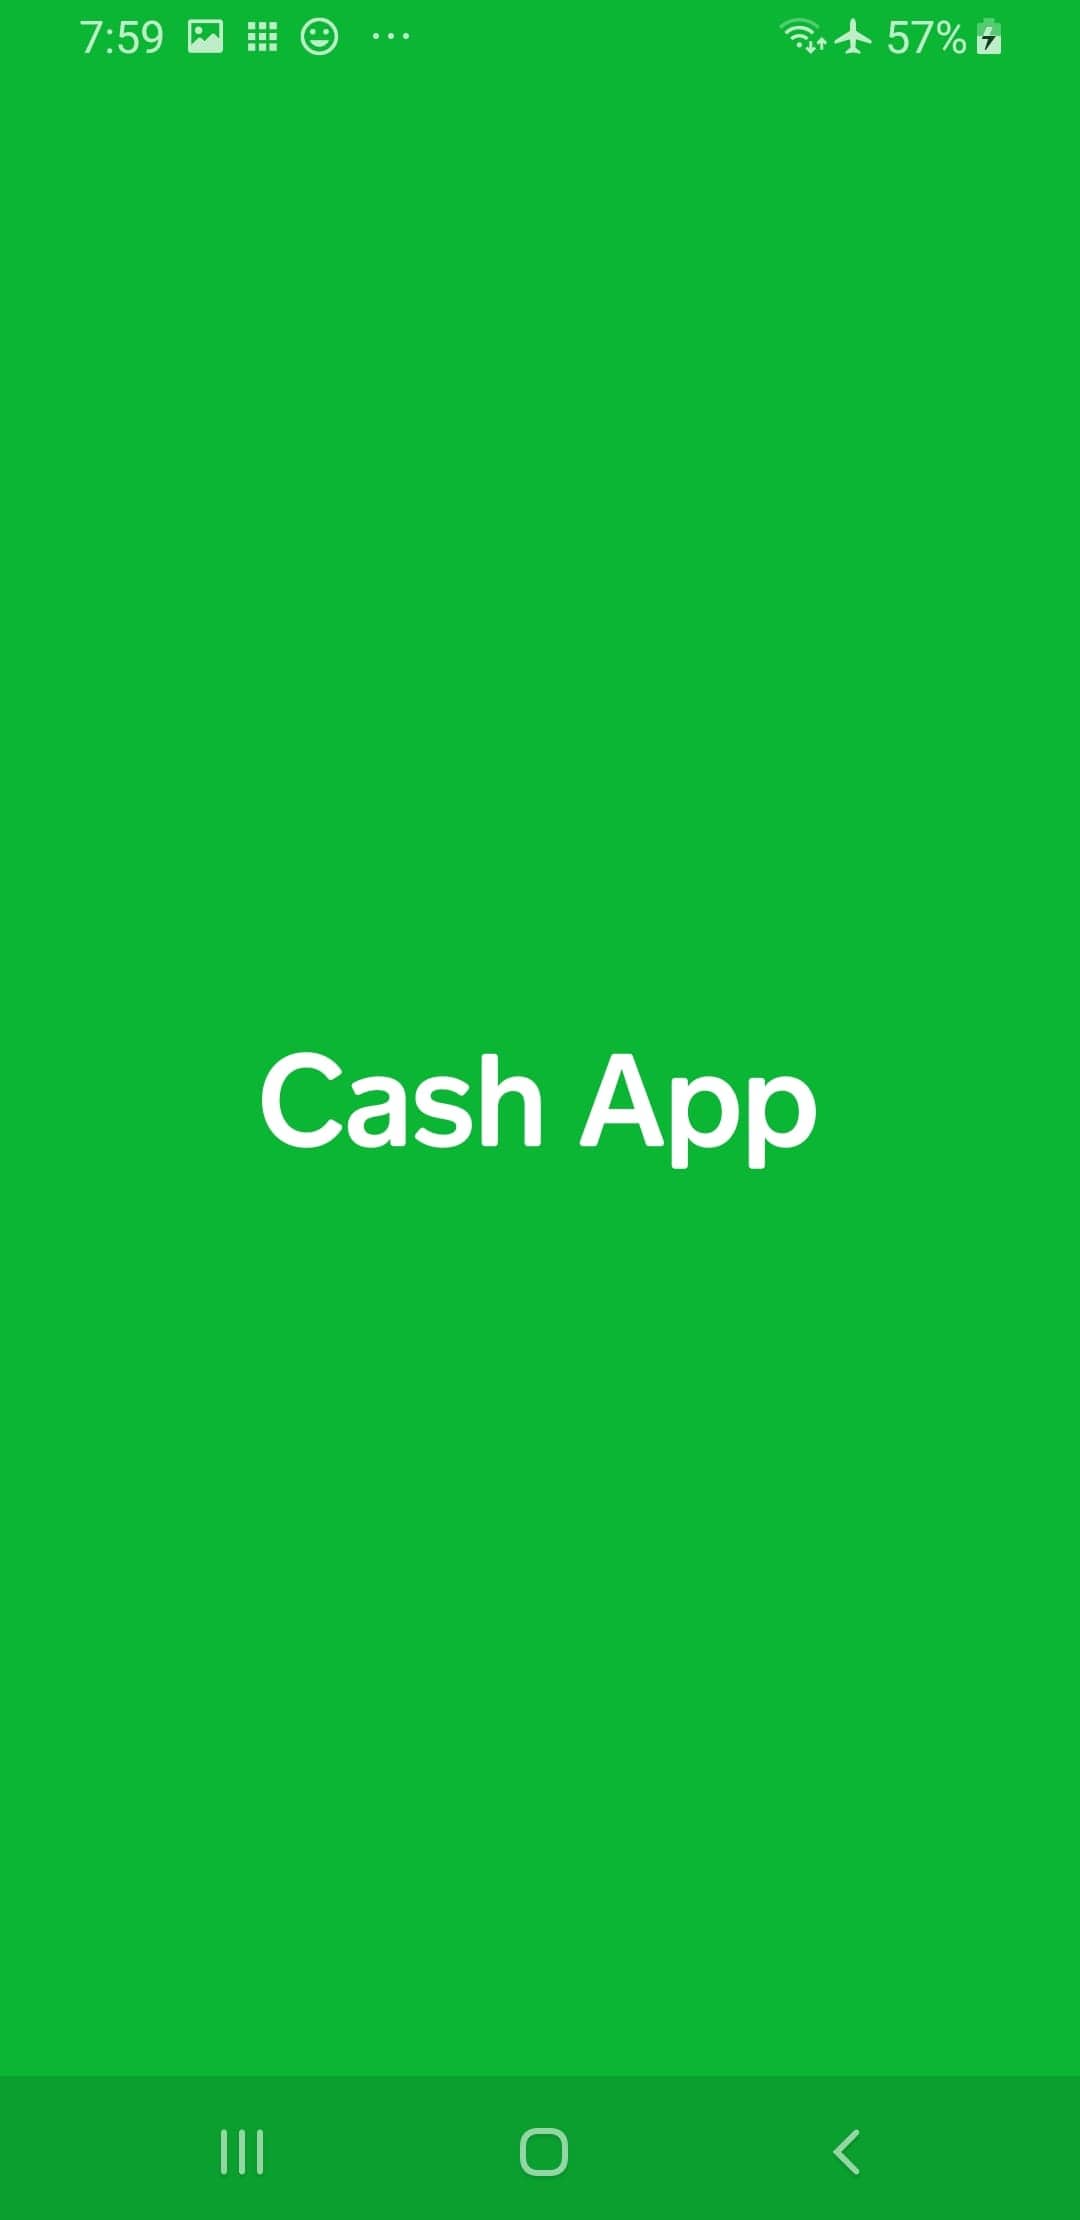 Screenshot From Our Cash App Review